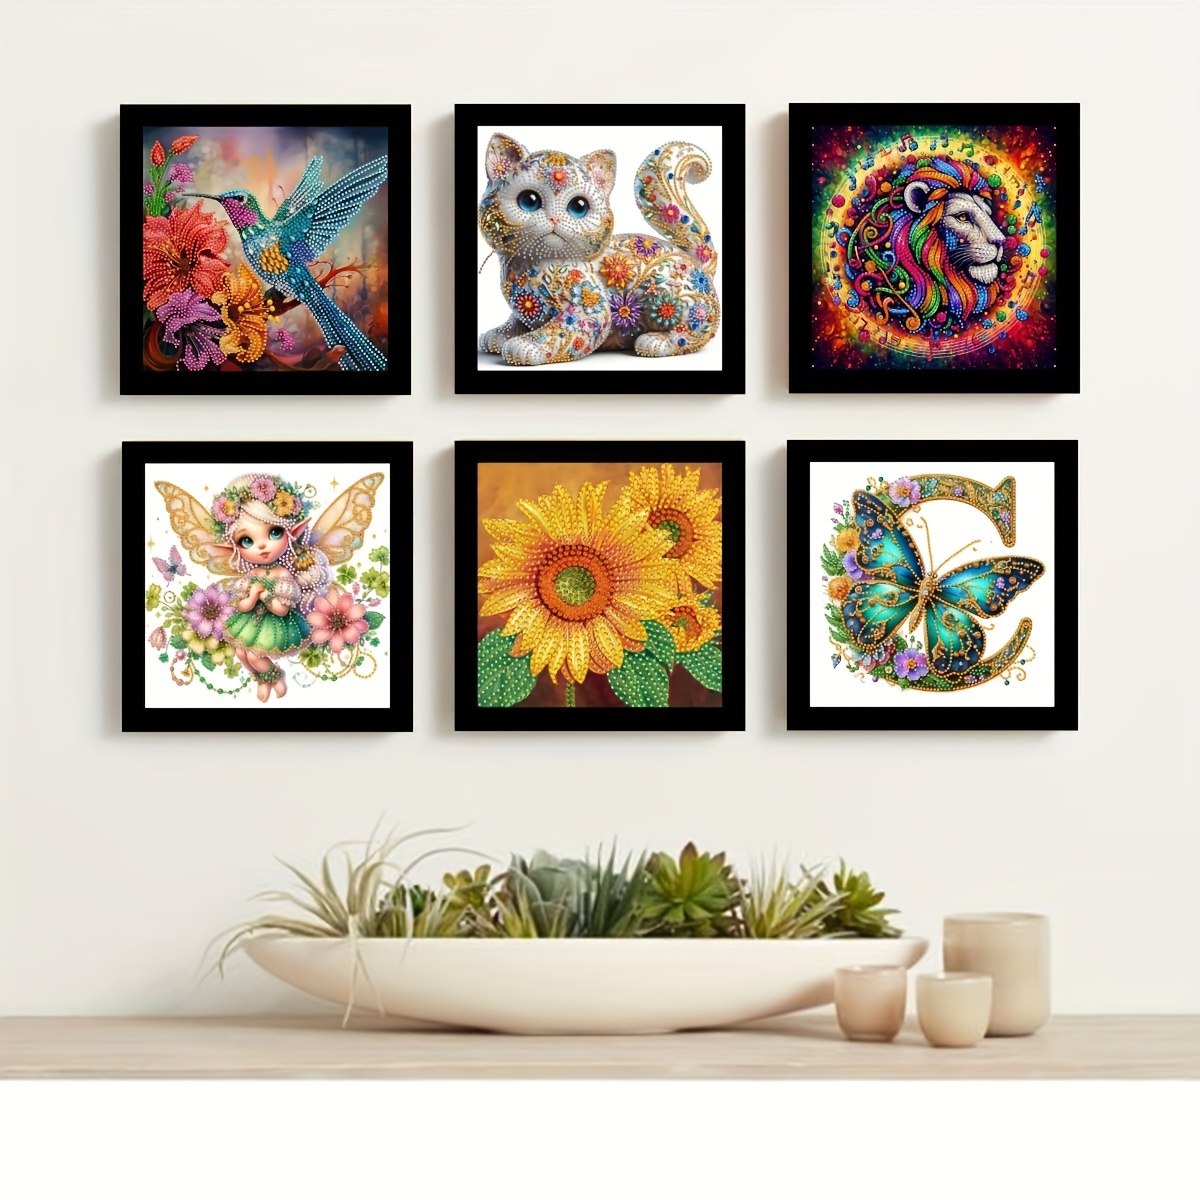 

6-pack Pvc Magnetic Self-adhesive Diamond Painting Frames – Versatile Display Frames For 12x12 Diamond Art Canvas, Front-loading Design, Ideal For Wall, Window, Door – 10x10 Inch Display Area